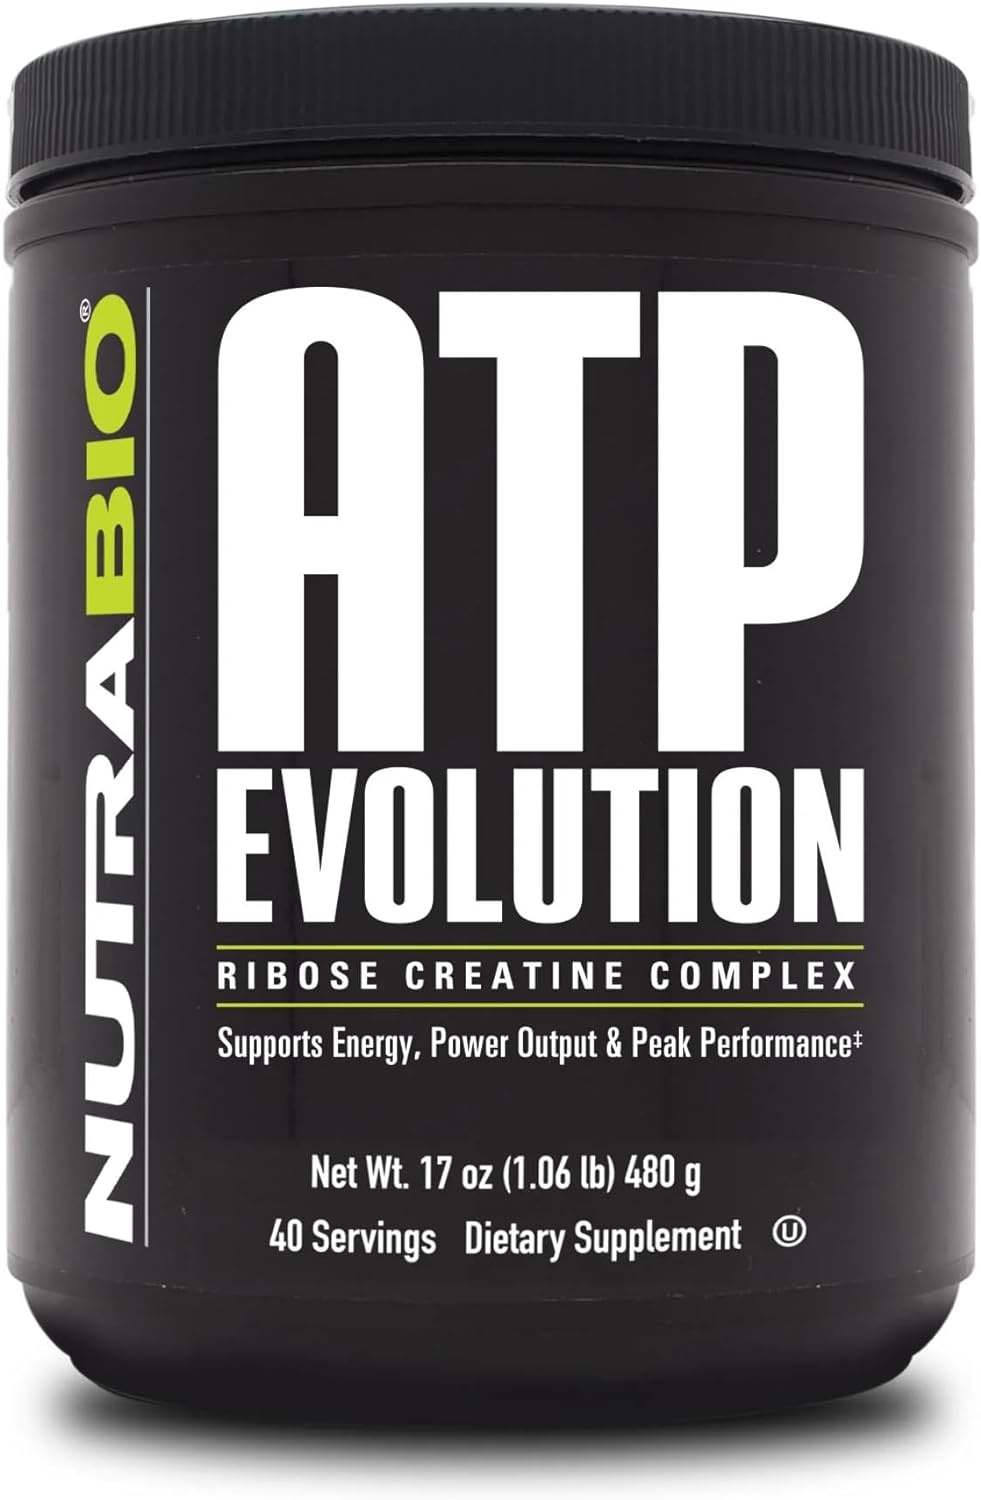 NutraBio ATP Evolution, Supercharged Muscle Recovery, 500g Powder - 40 Servings